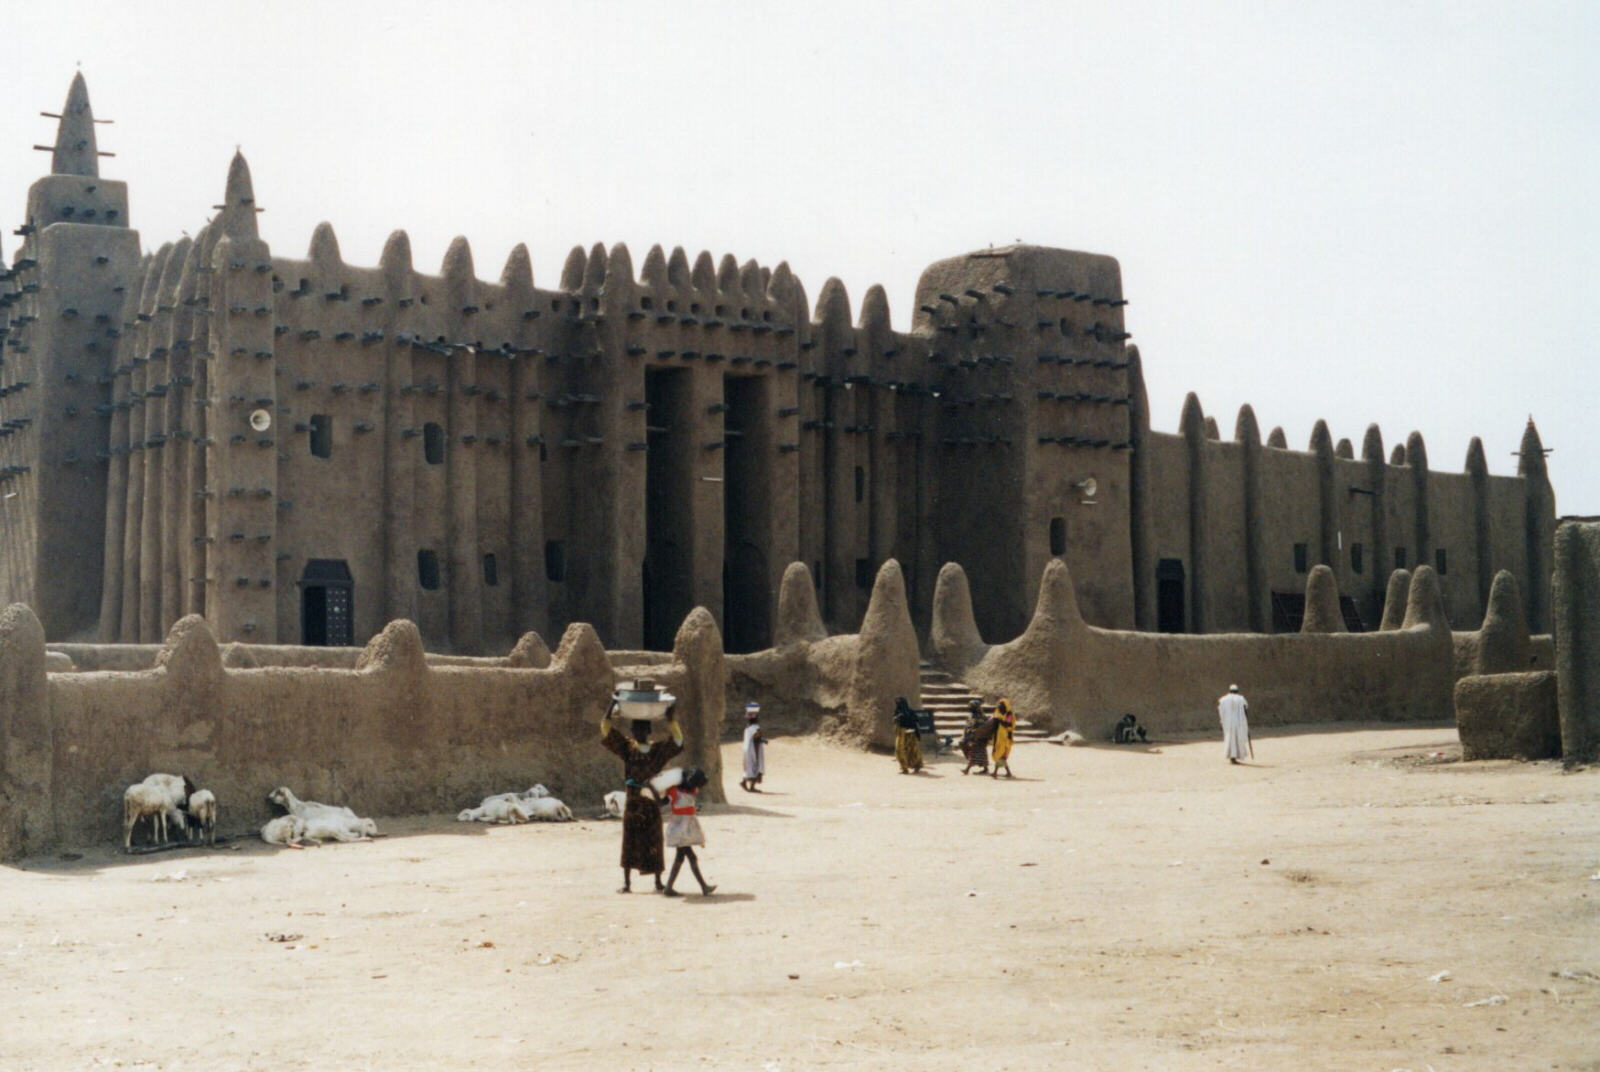 The Great Mosque in Djenne, Mali